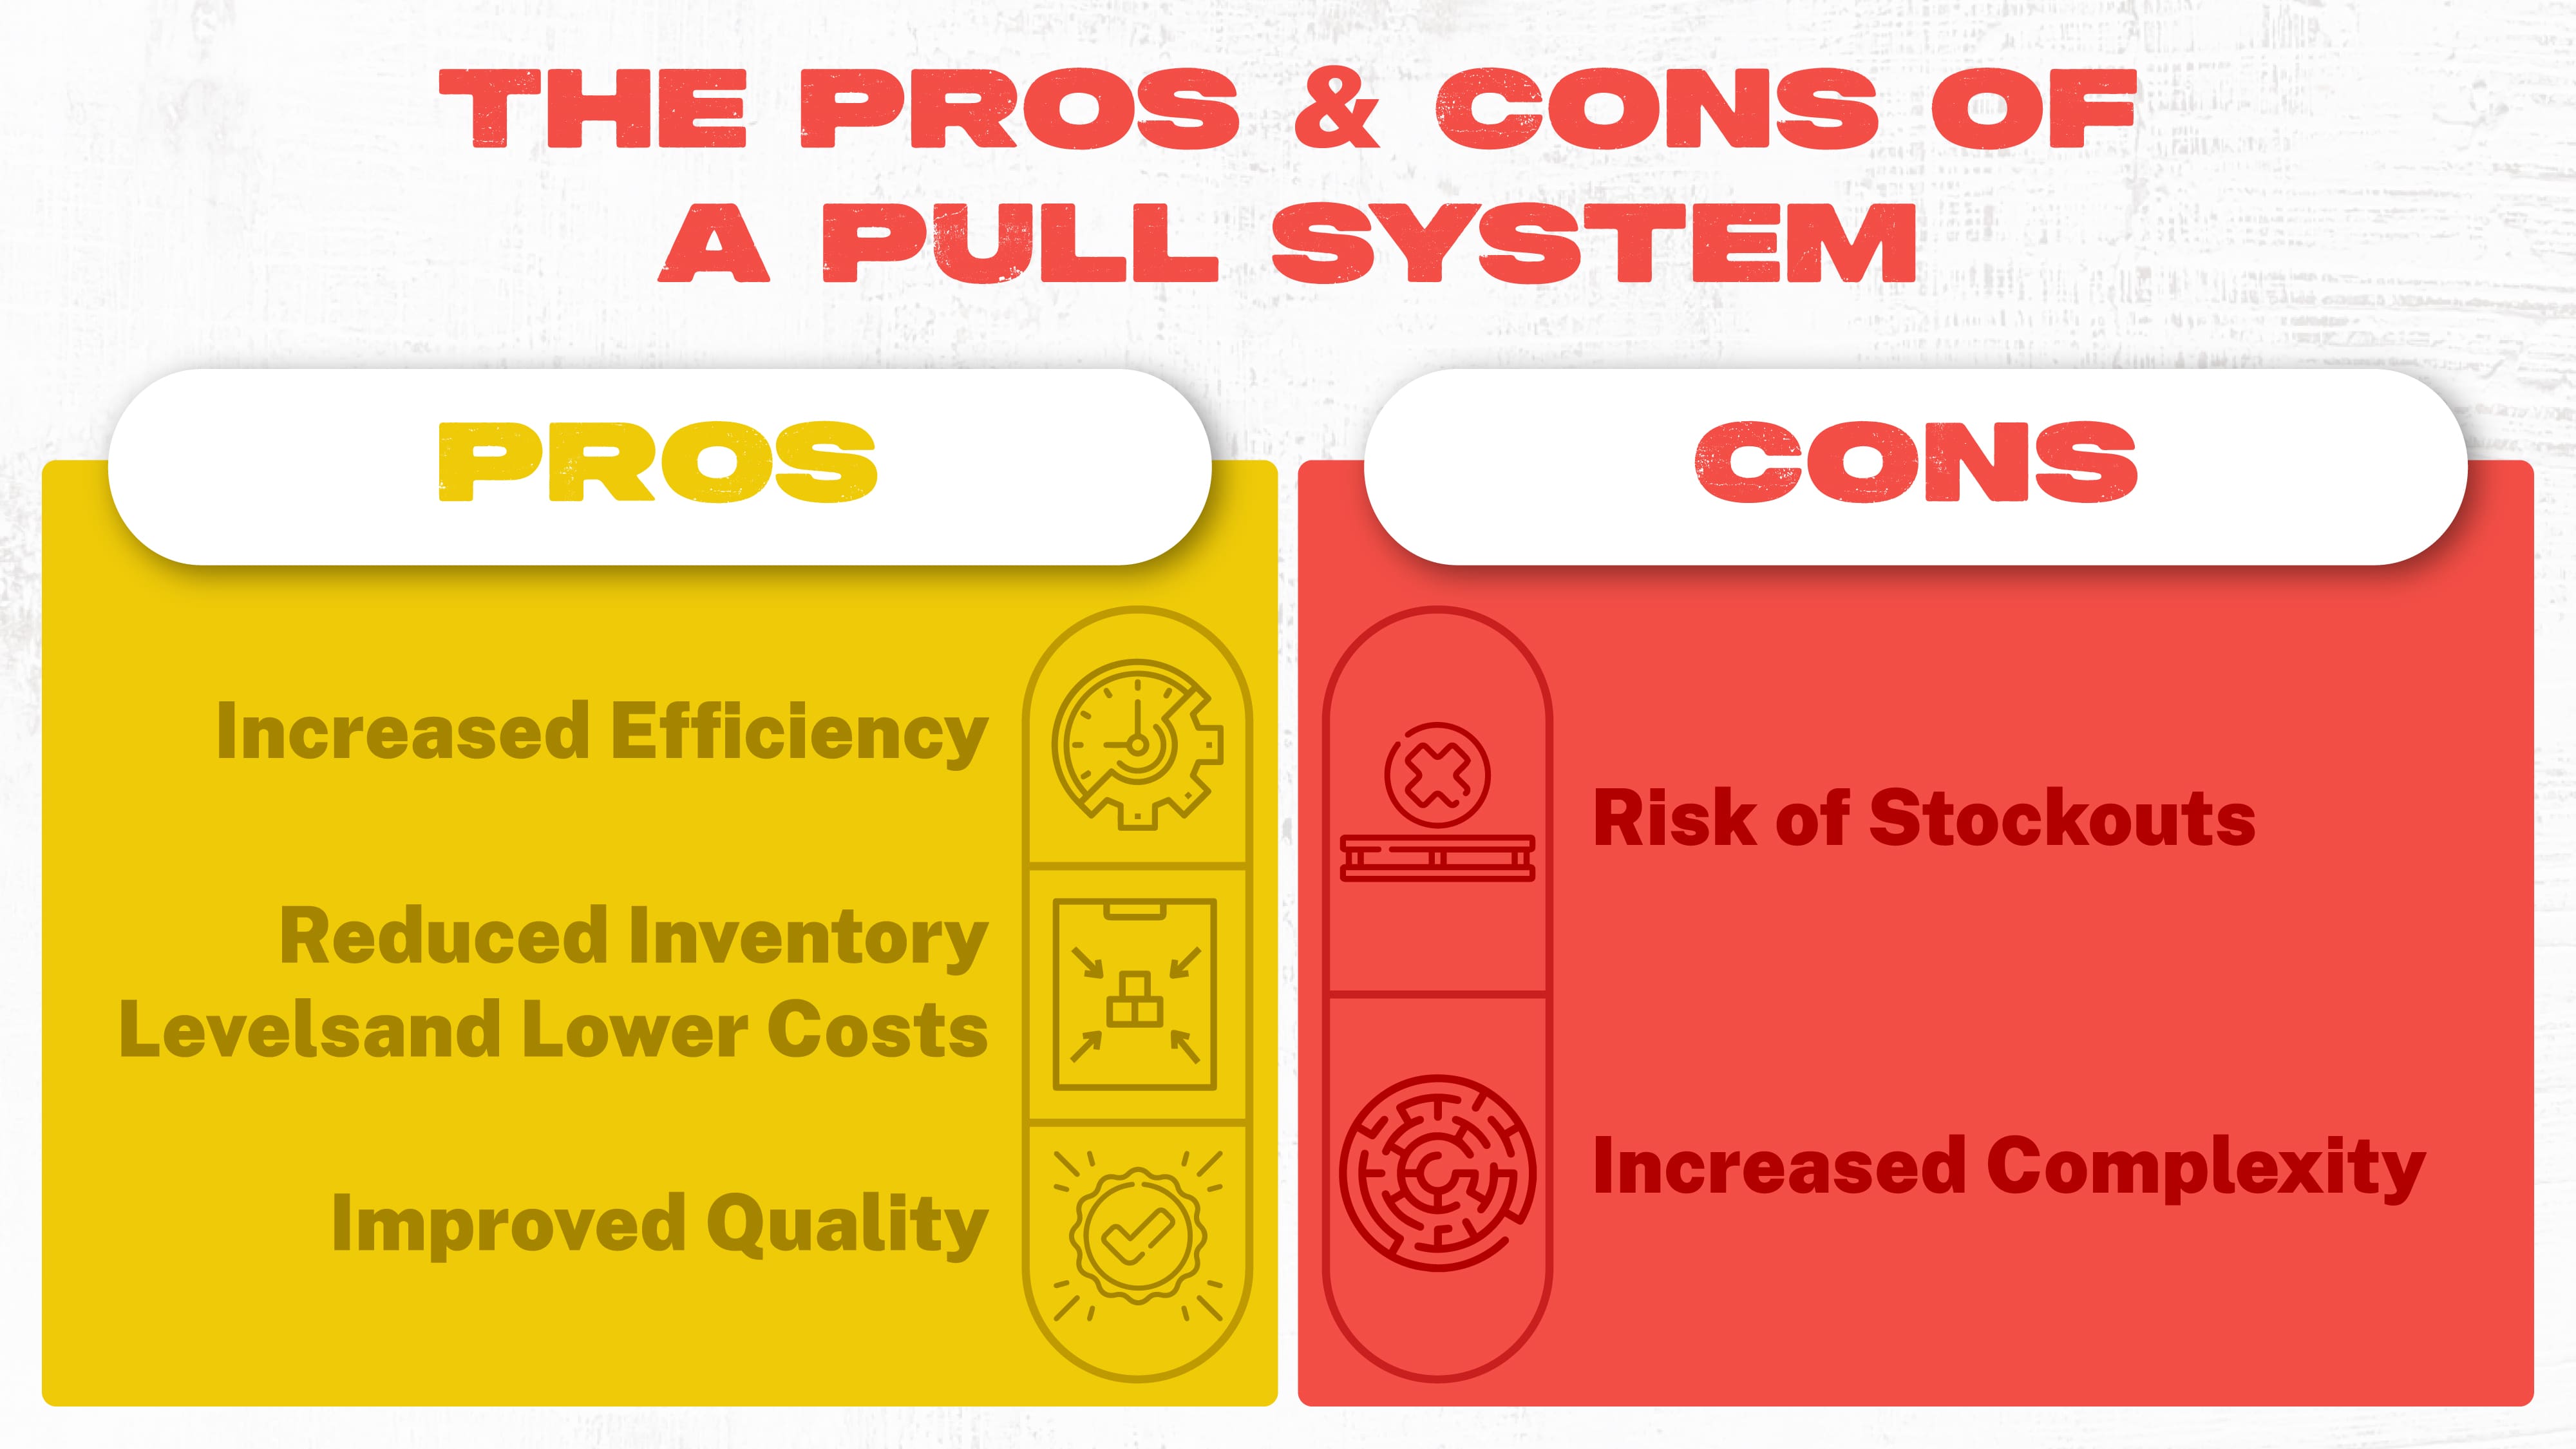 THE PROS & CONS OF A PULL SYSTEM